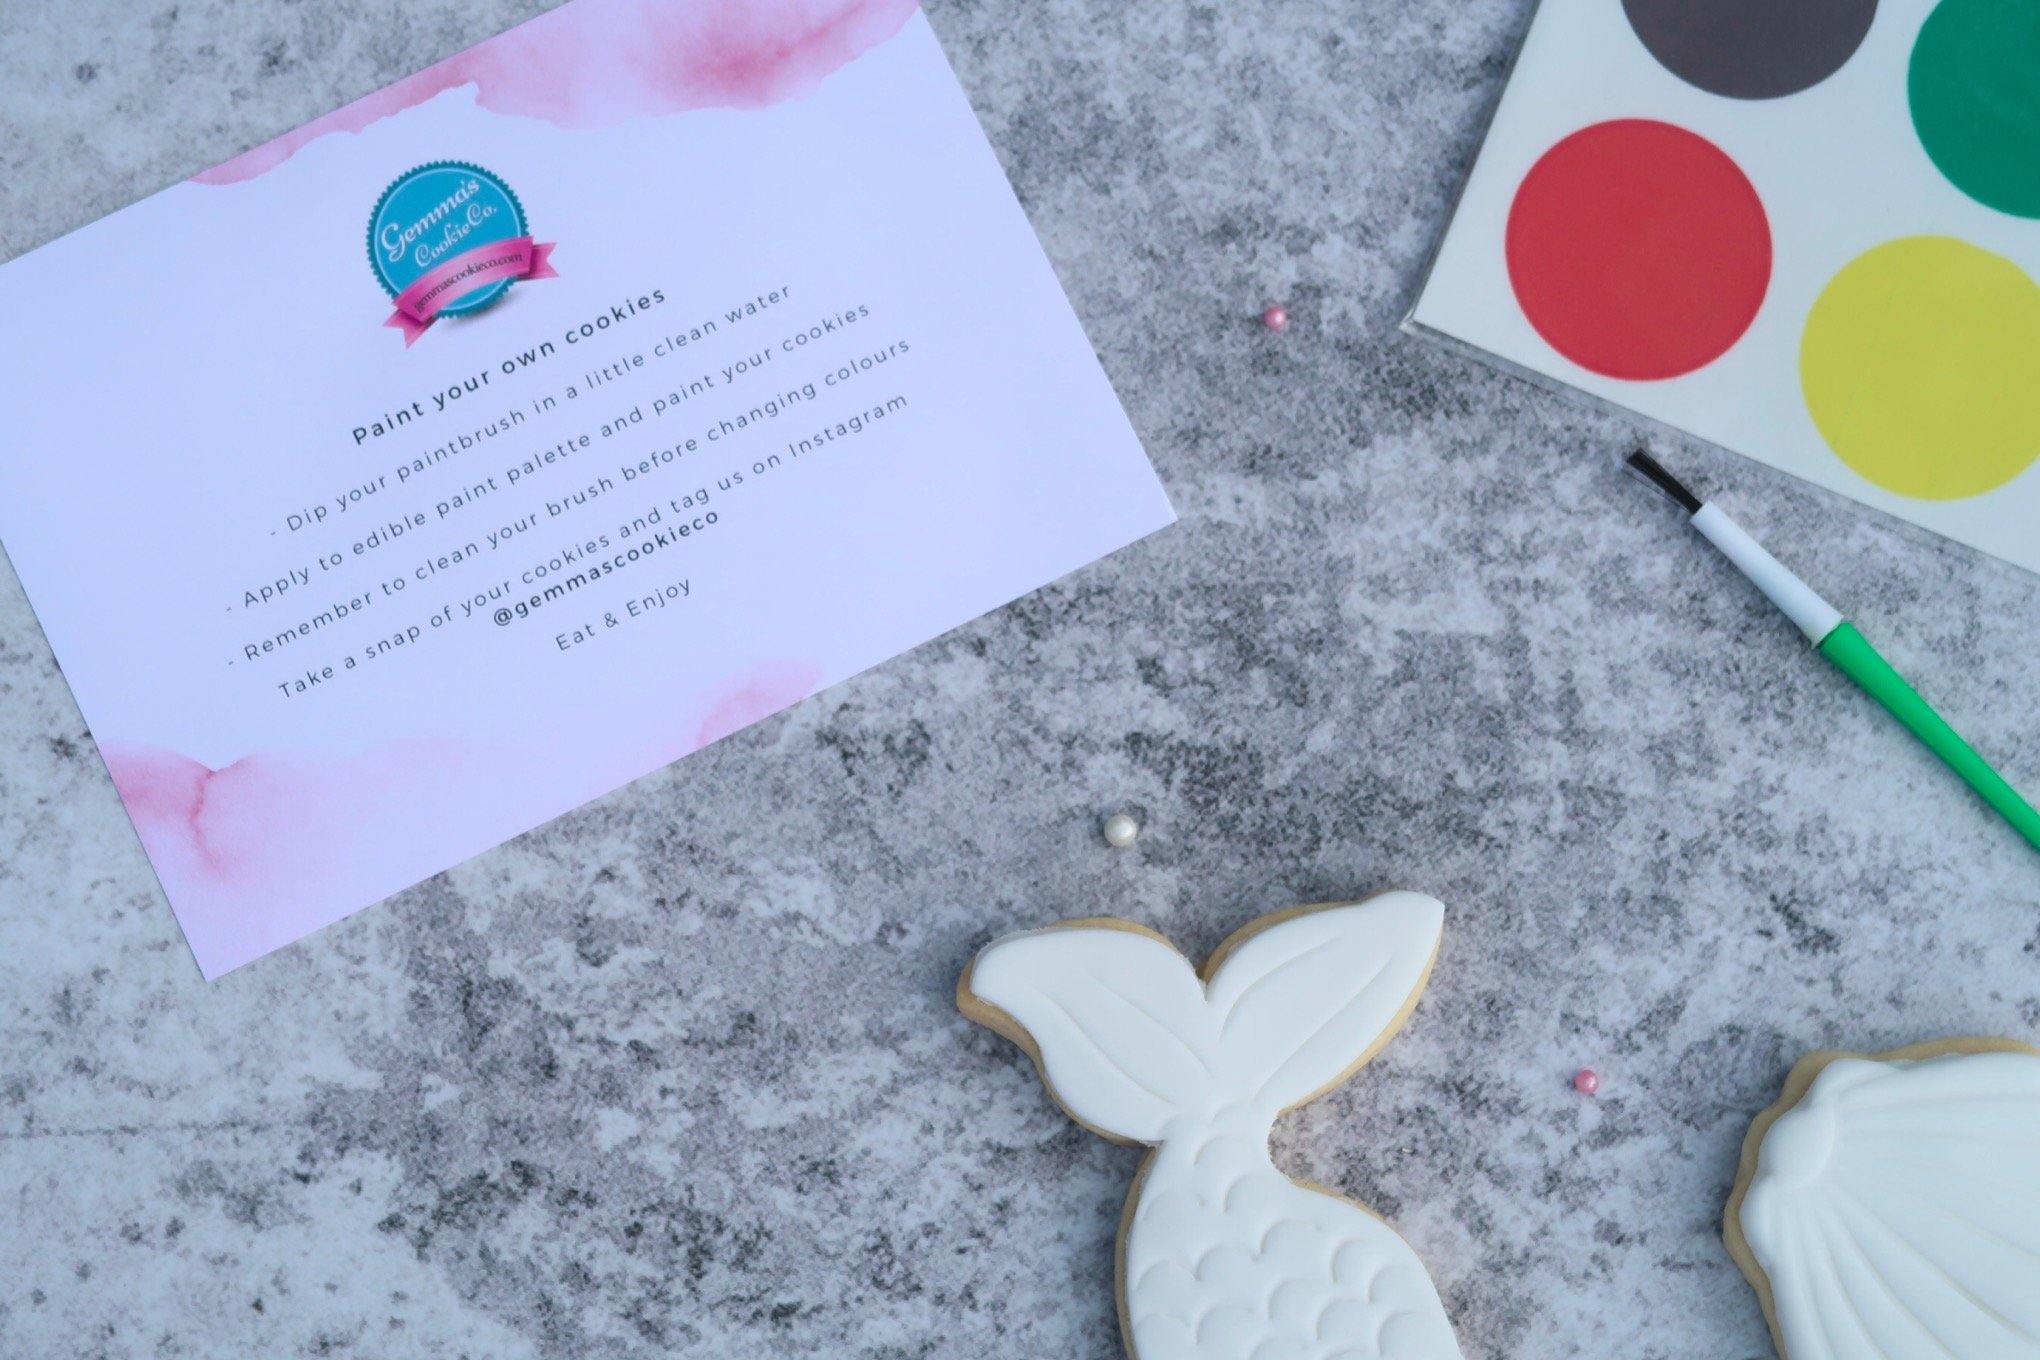 Paint your own mermaid cookie set